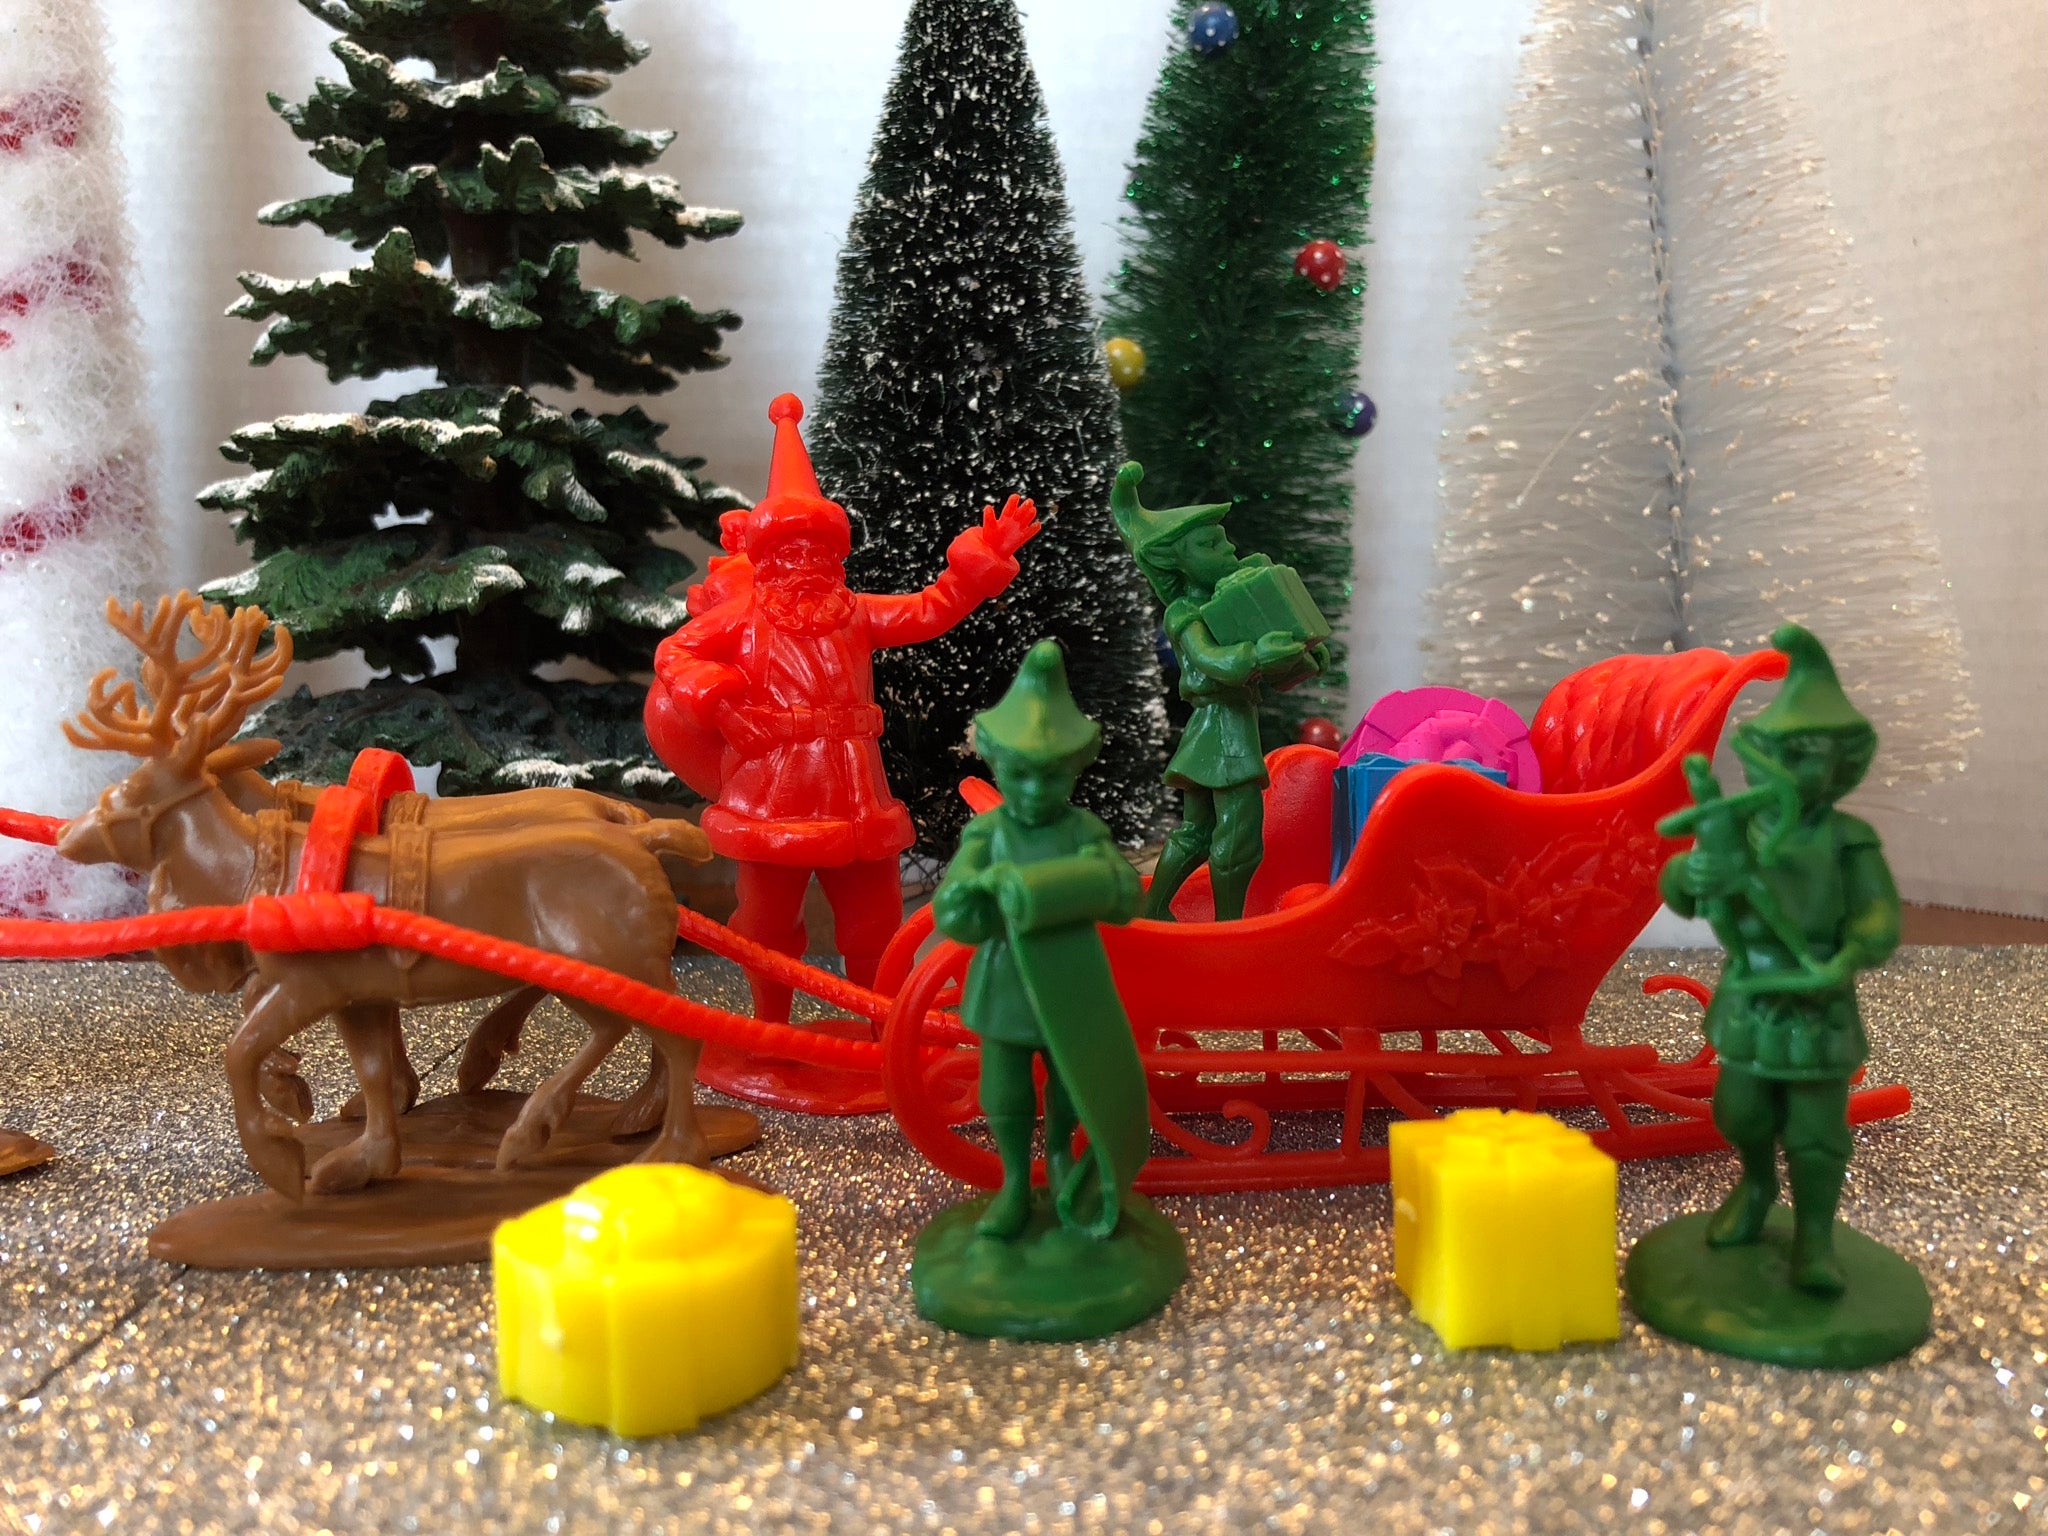 LOD008 (North Pole Set: Santa's Christmas Delivery) – LOD Toy Soldiers